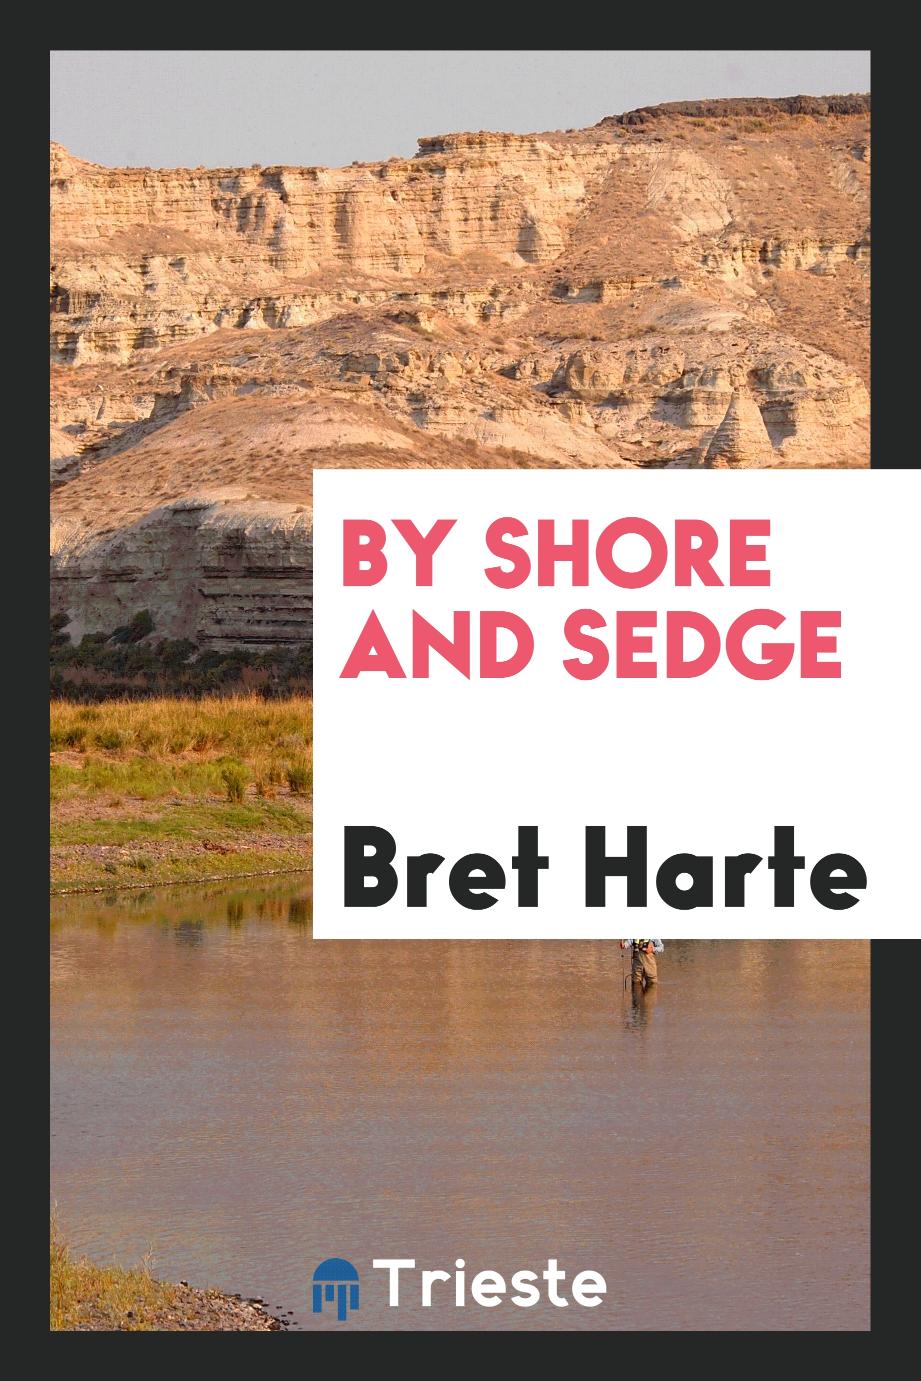 By shore and sedge